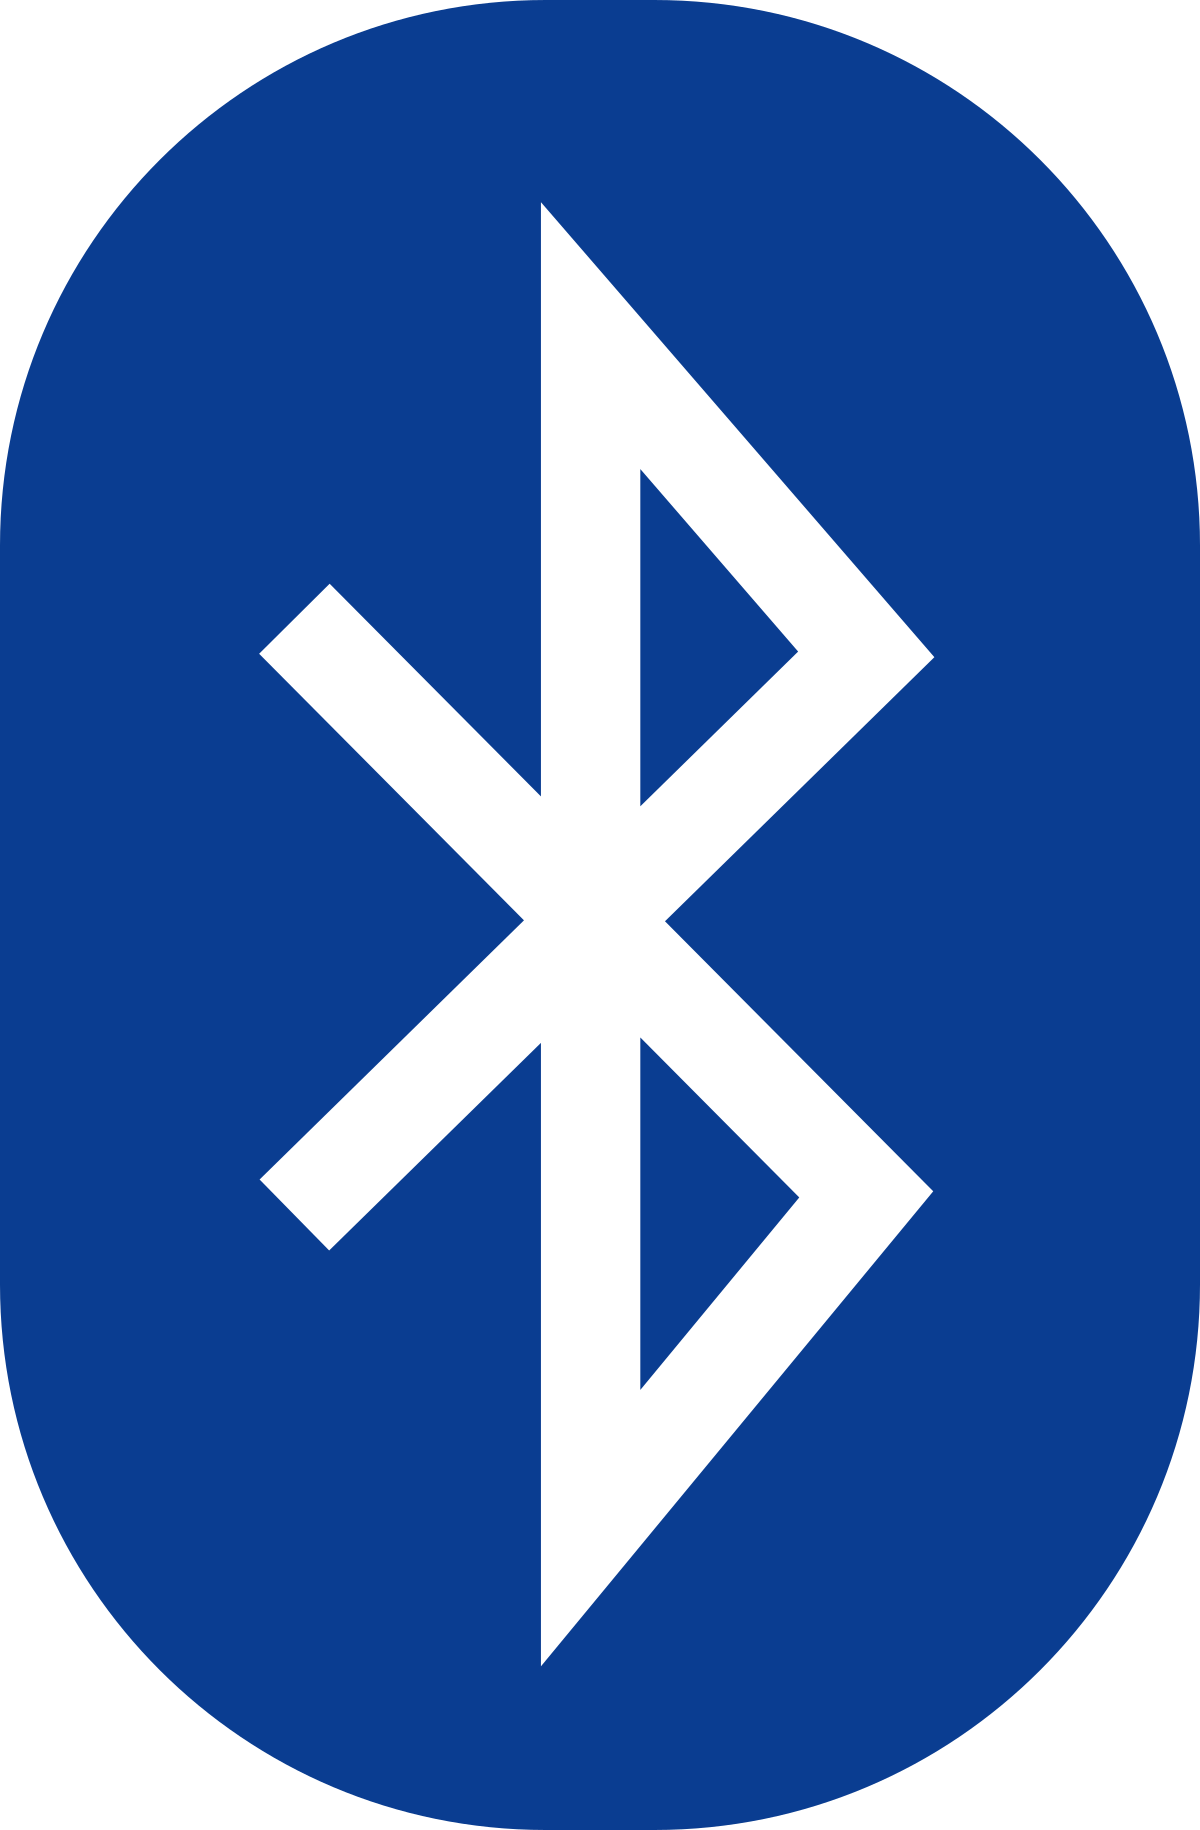 Bluetooth icon in control panel & device manager